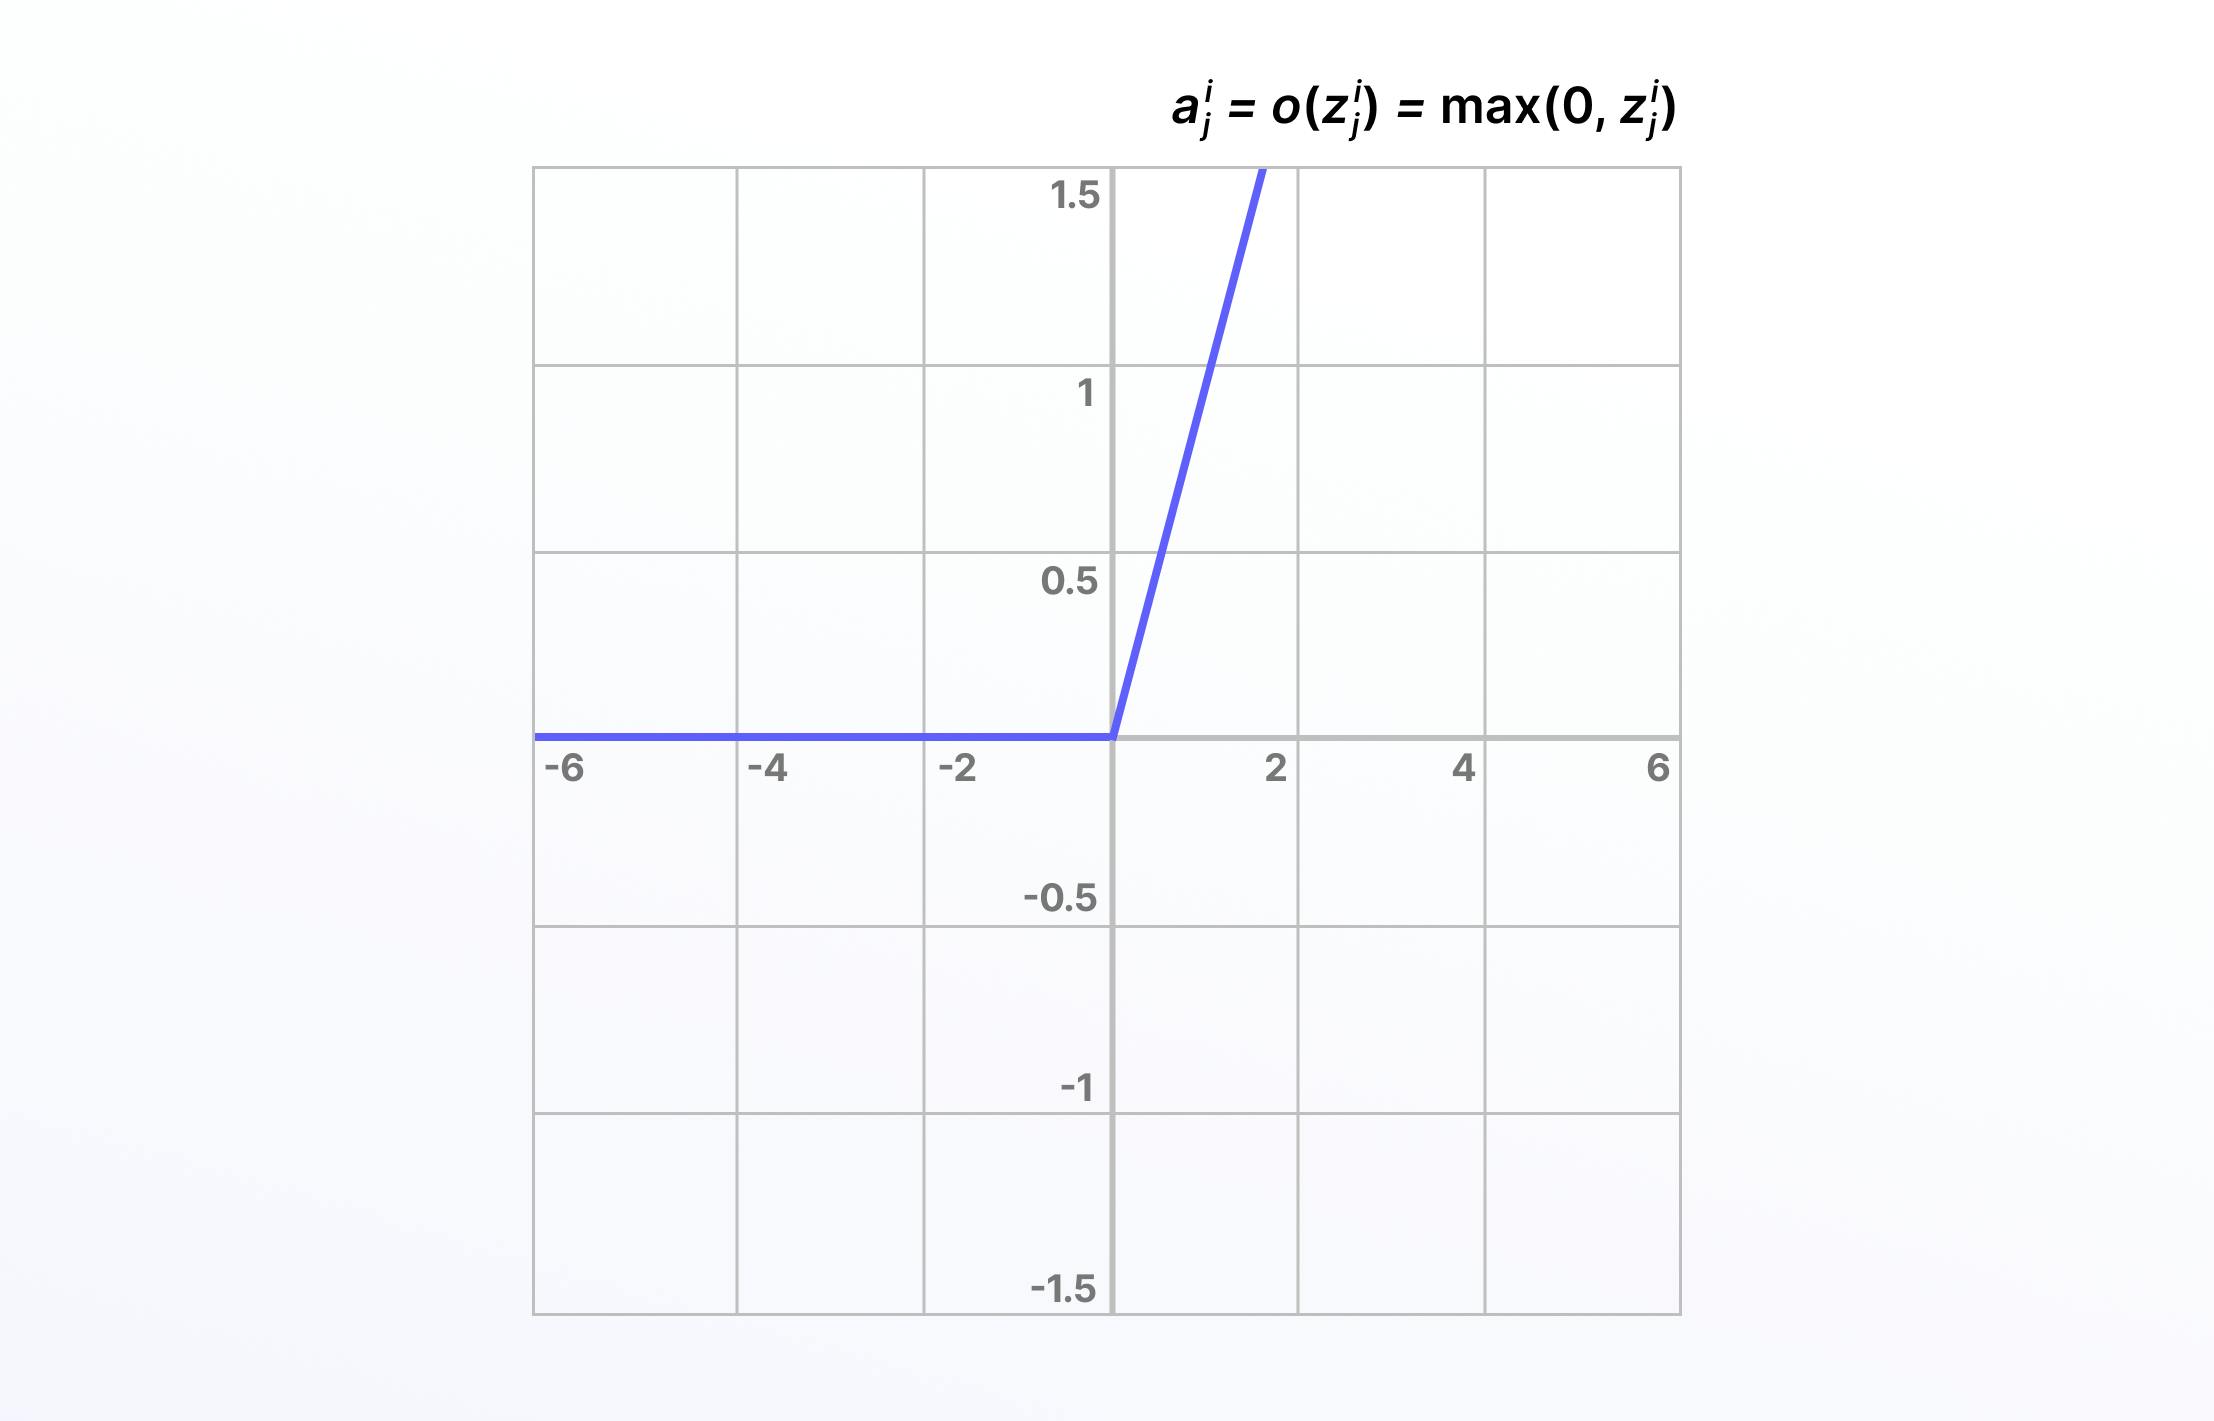 Activation function graph